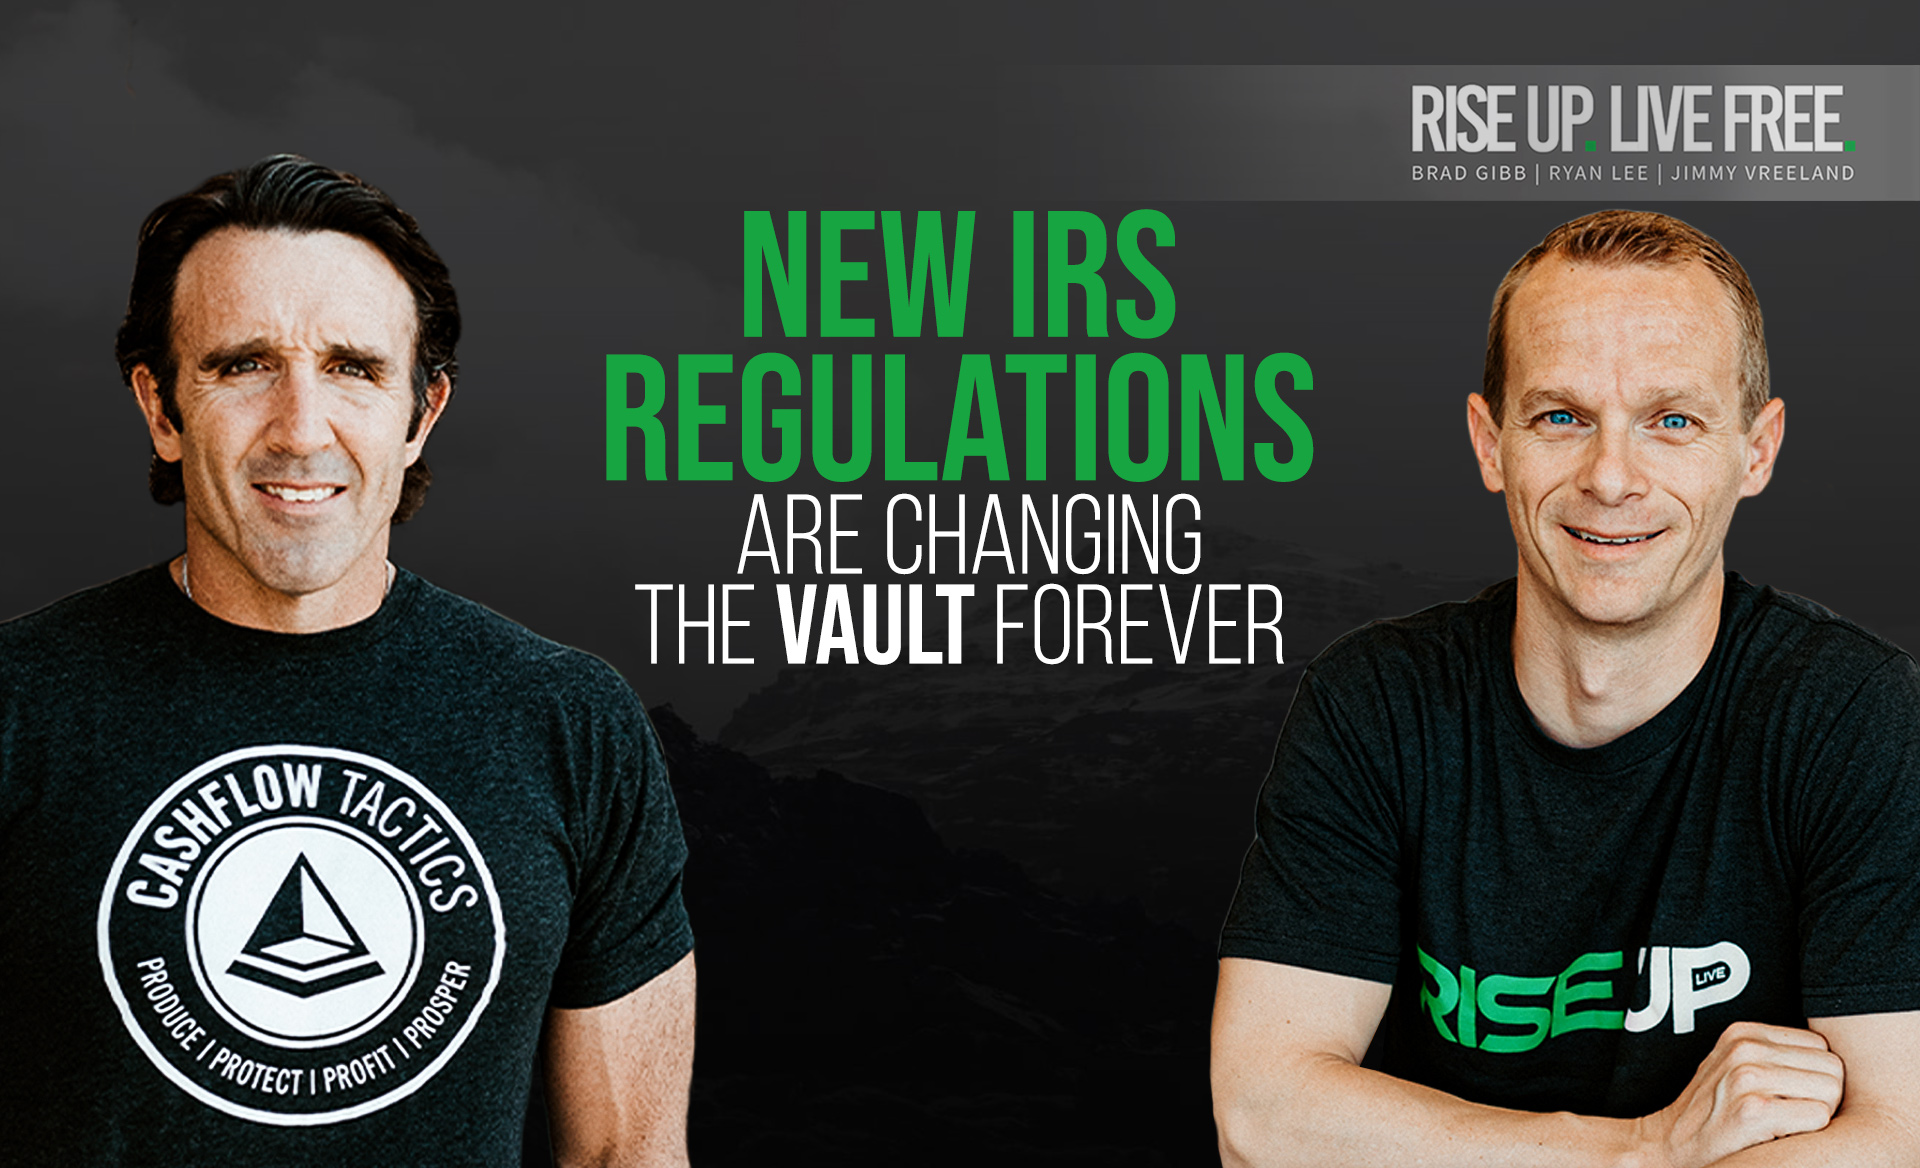 New IRS Regulations are Changing the VAULT Forever